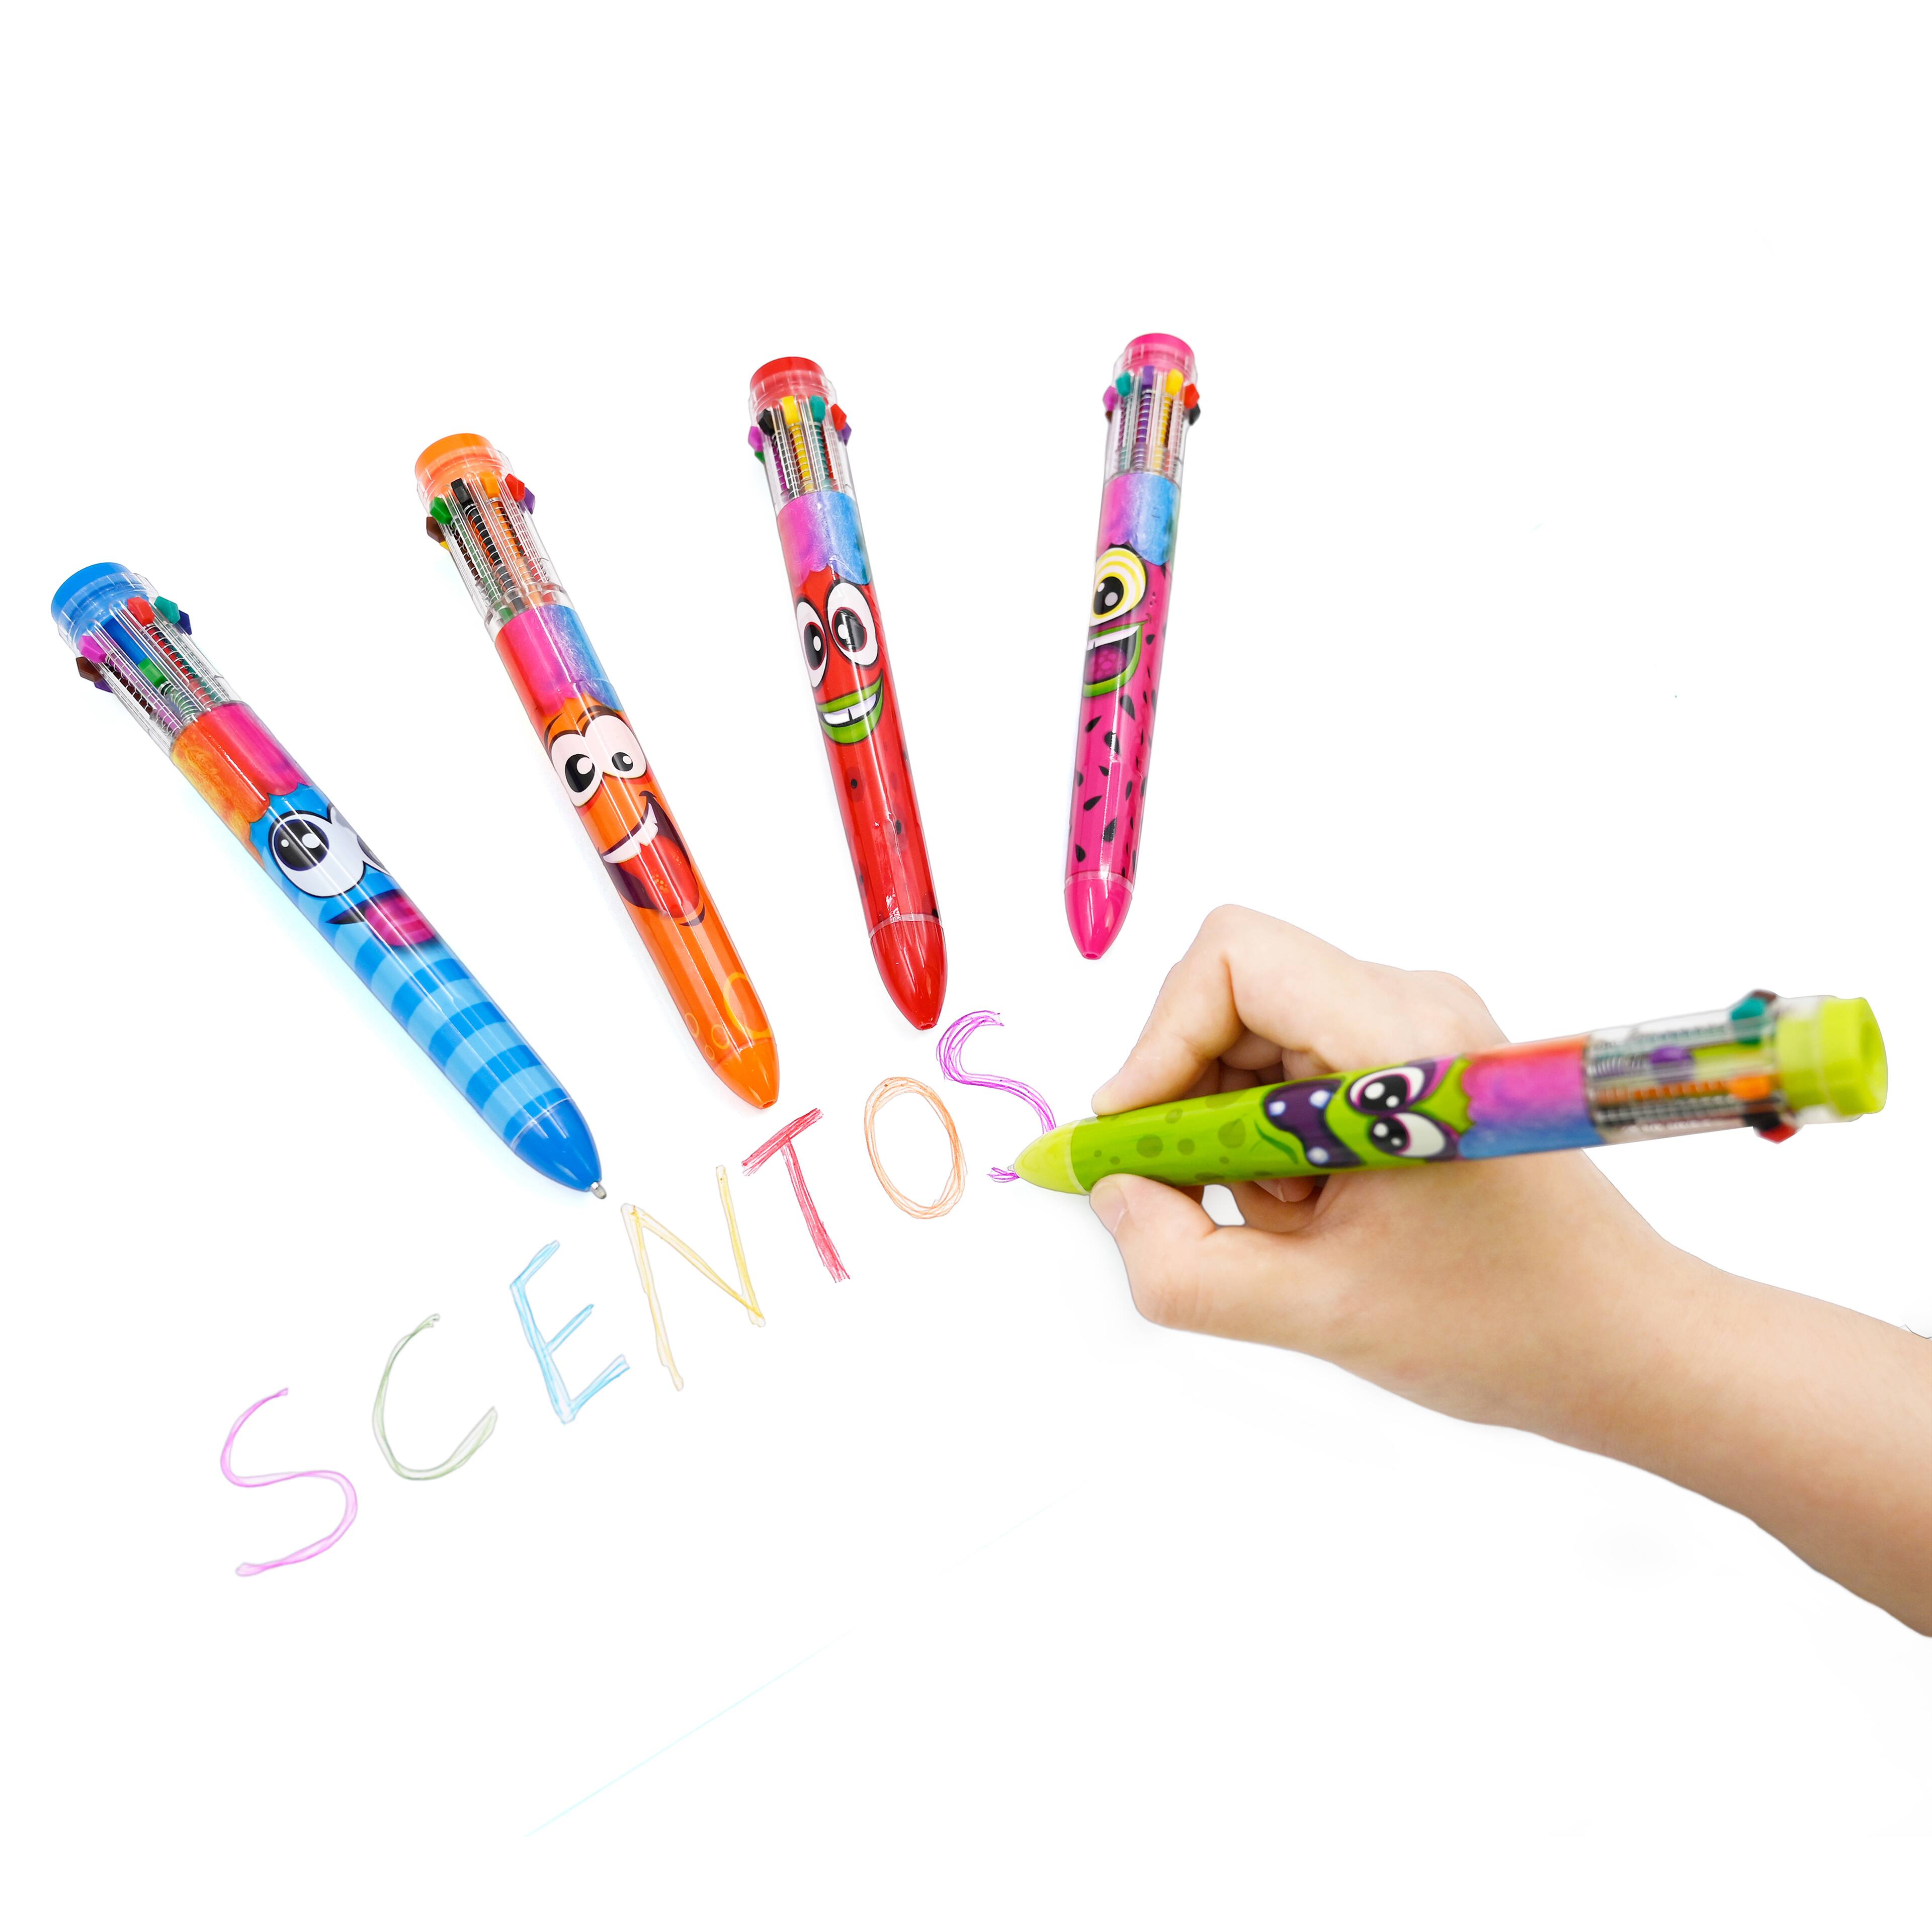 Scentos Christmas Scented Ballpoint Green Rainbow Pen with 10 Assorted  Colors - Ages 3+, Pens